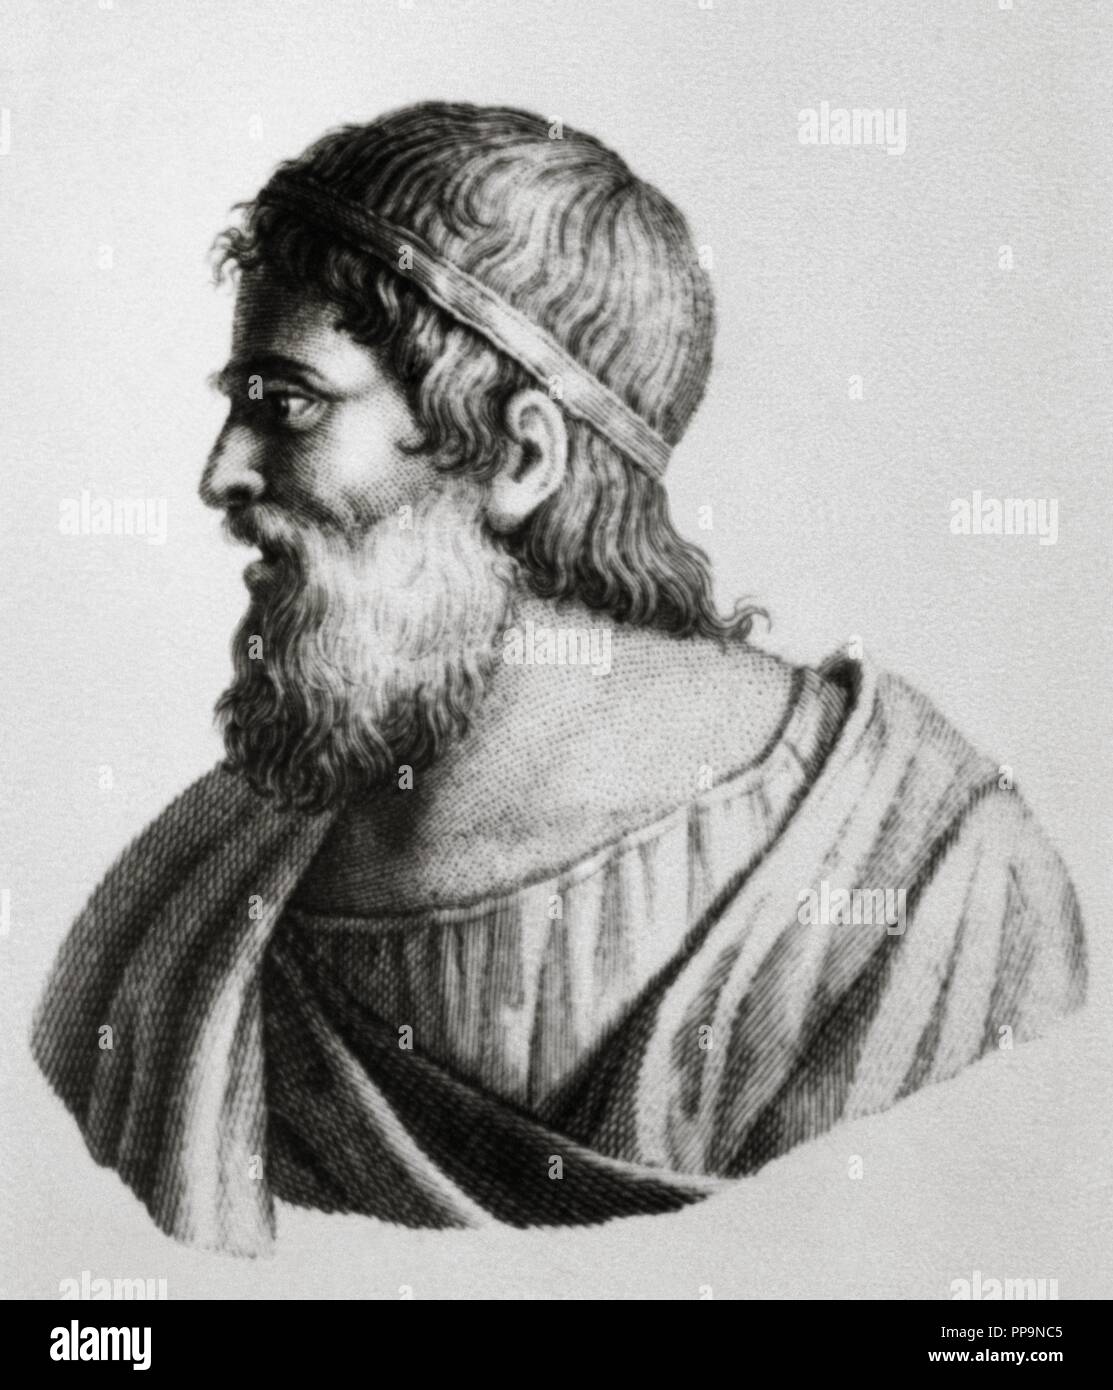 Archimedes (Syracuse-Syracuse-287, -212). Greek mathematician, physicist, engineer, inventor, and astronomer. Portrait. Engraving. Stock Photo